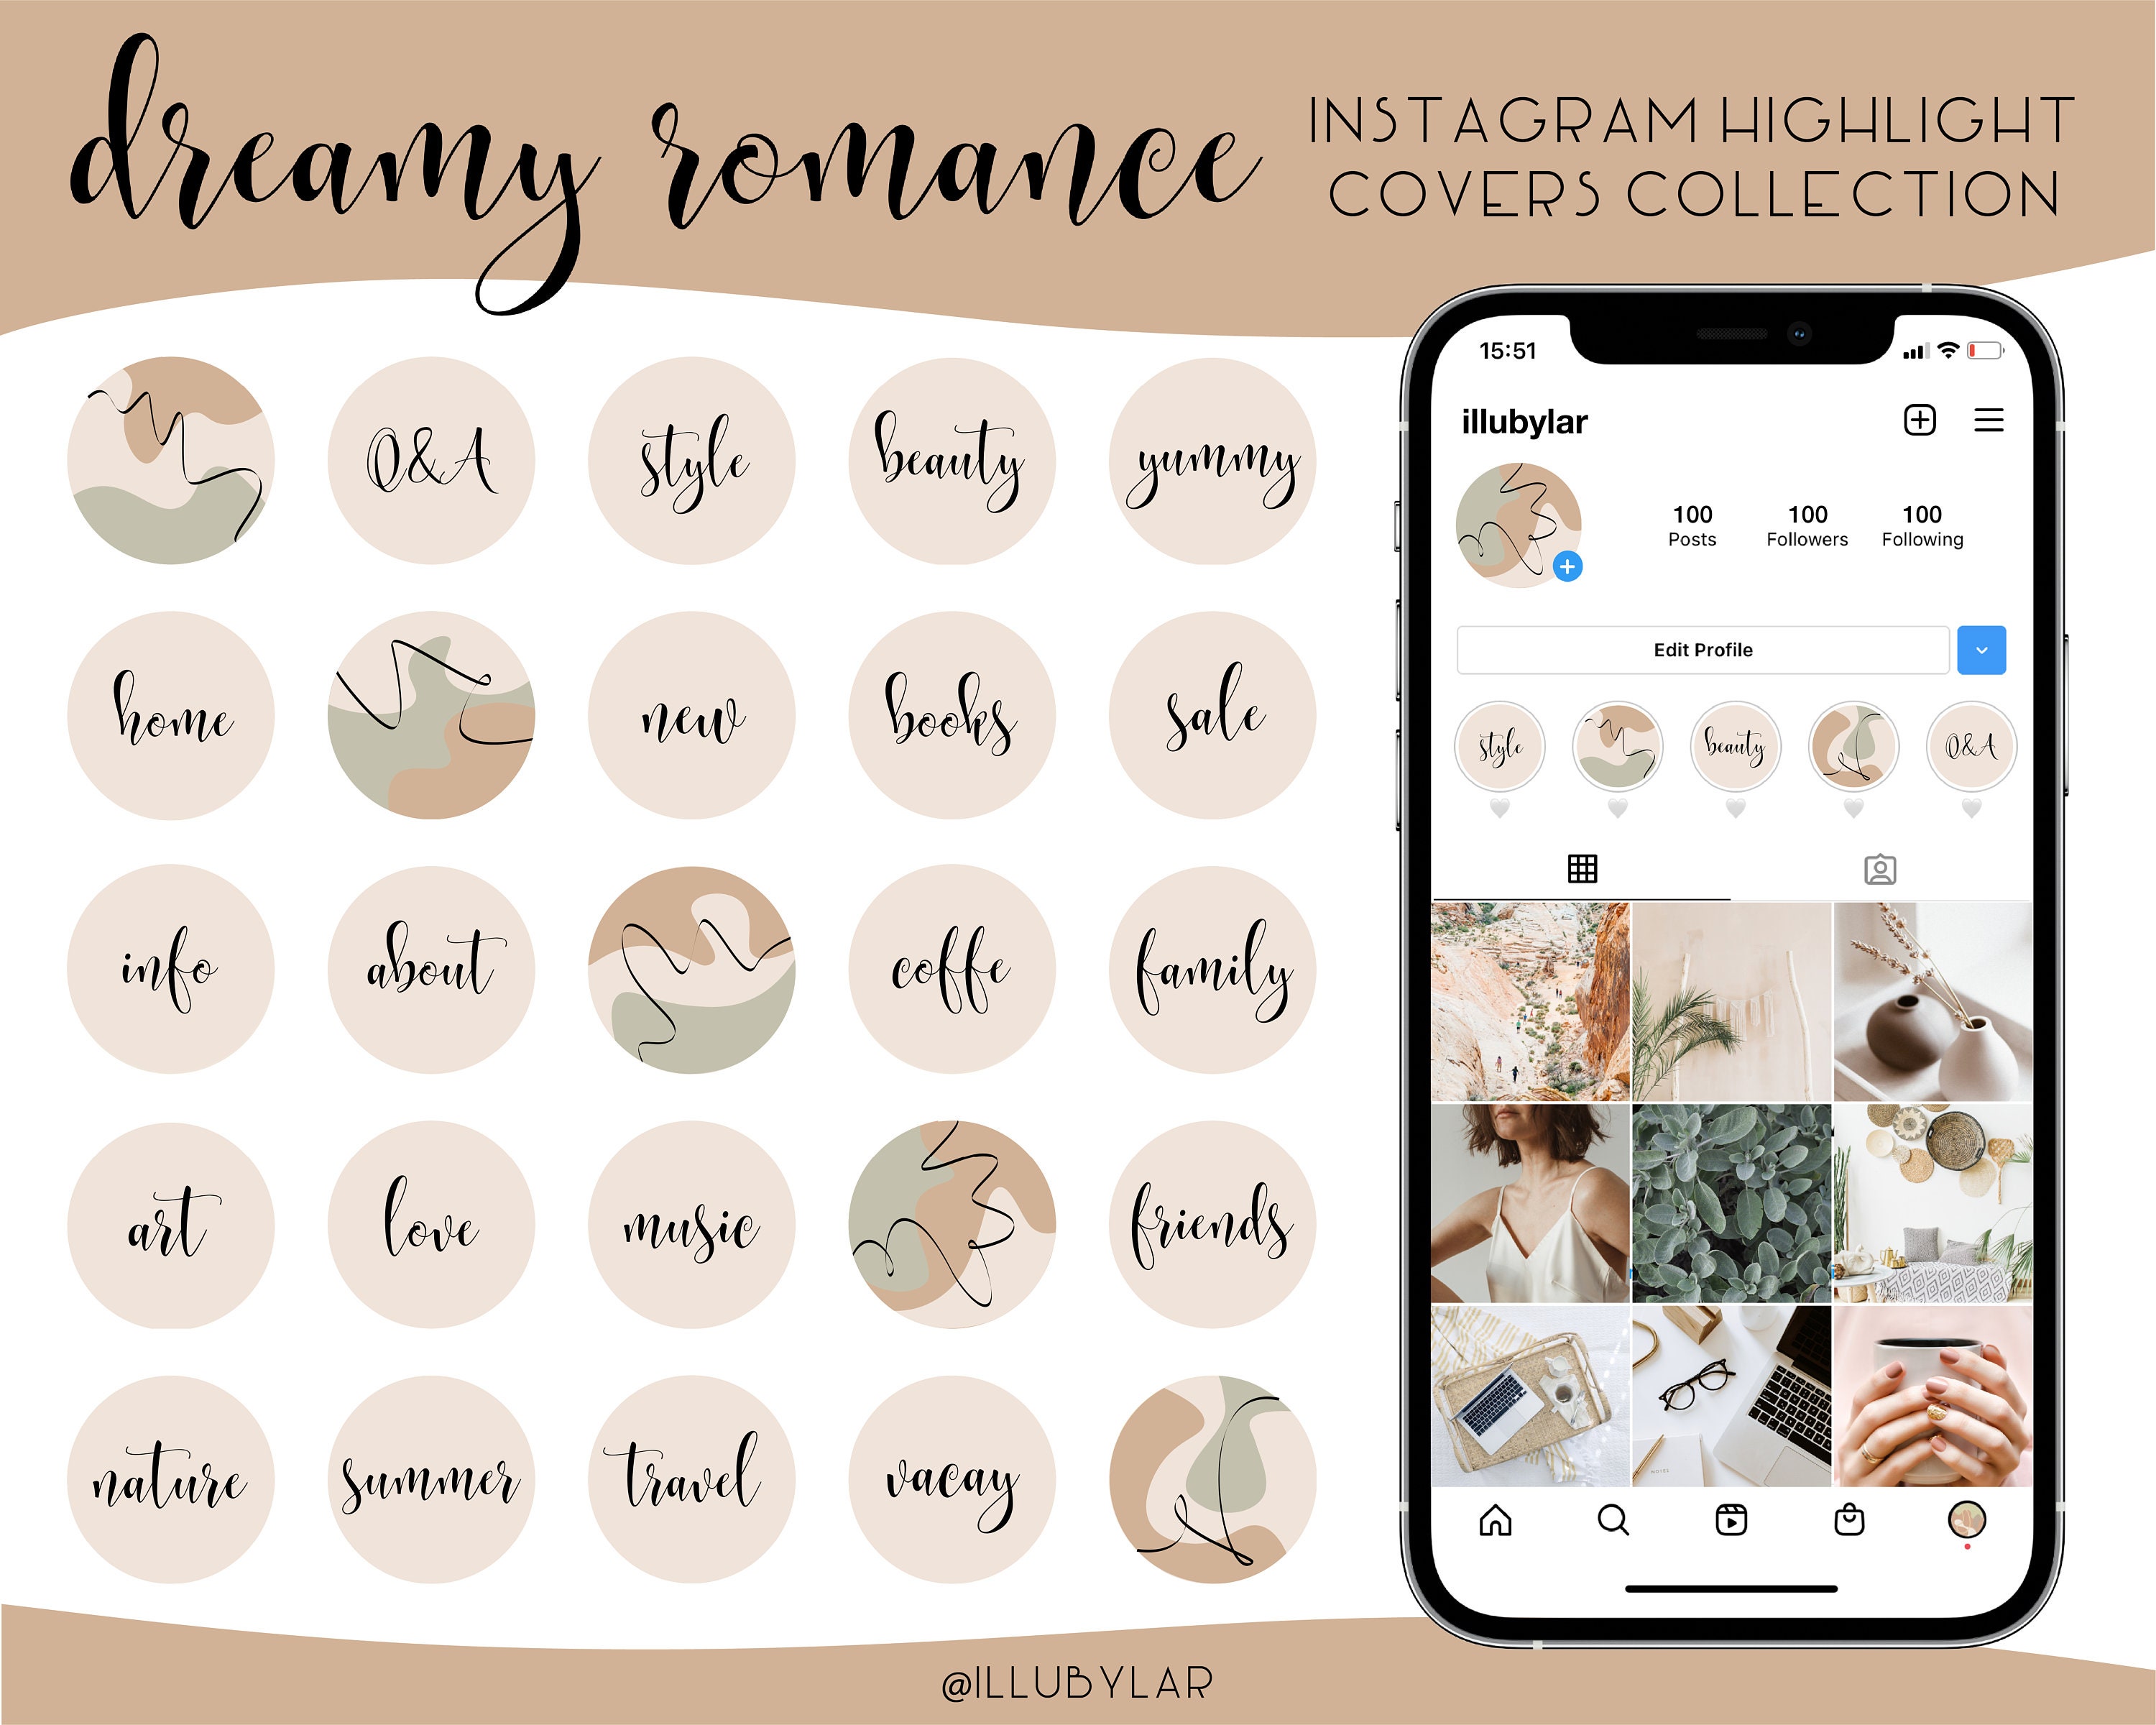 25 Instagram Highlight Covers Dreamy Romance IG Highlights - Etsy